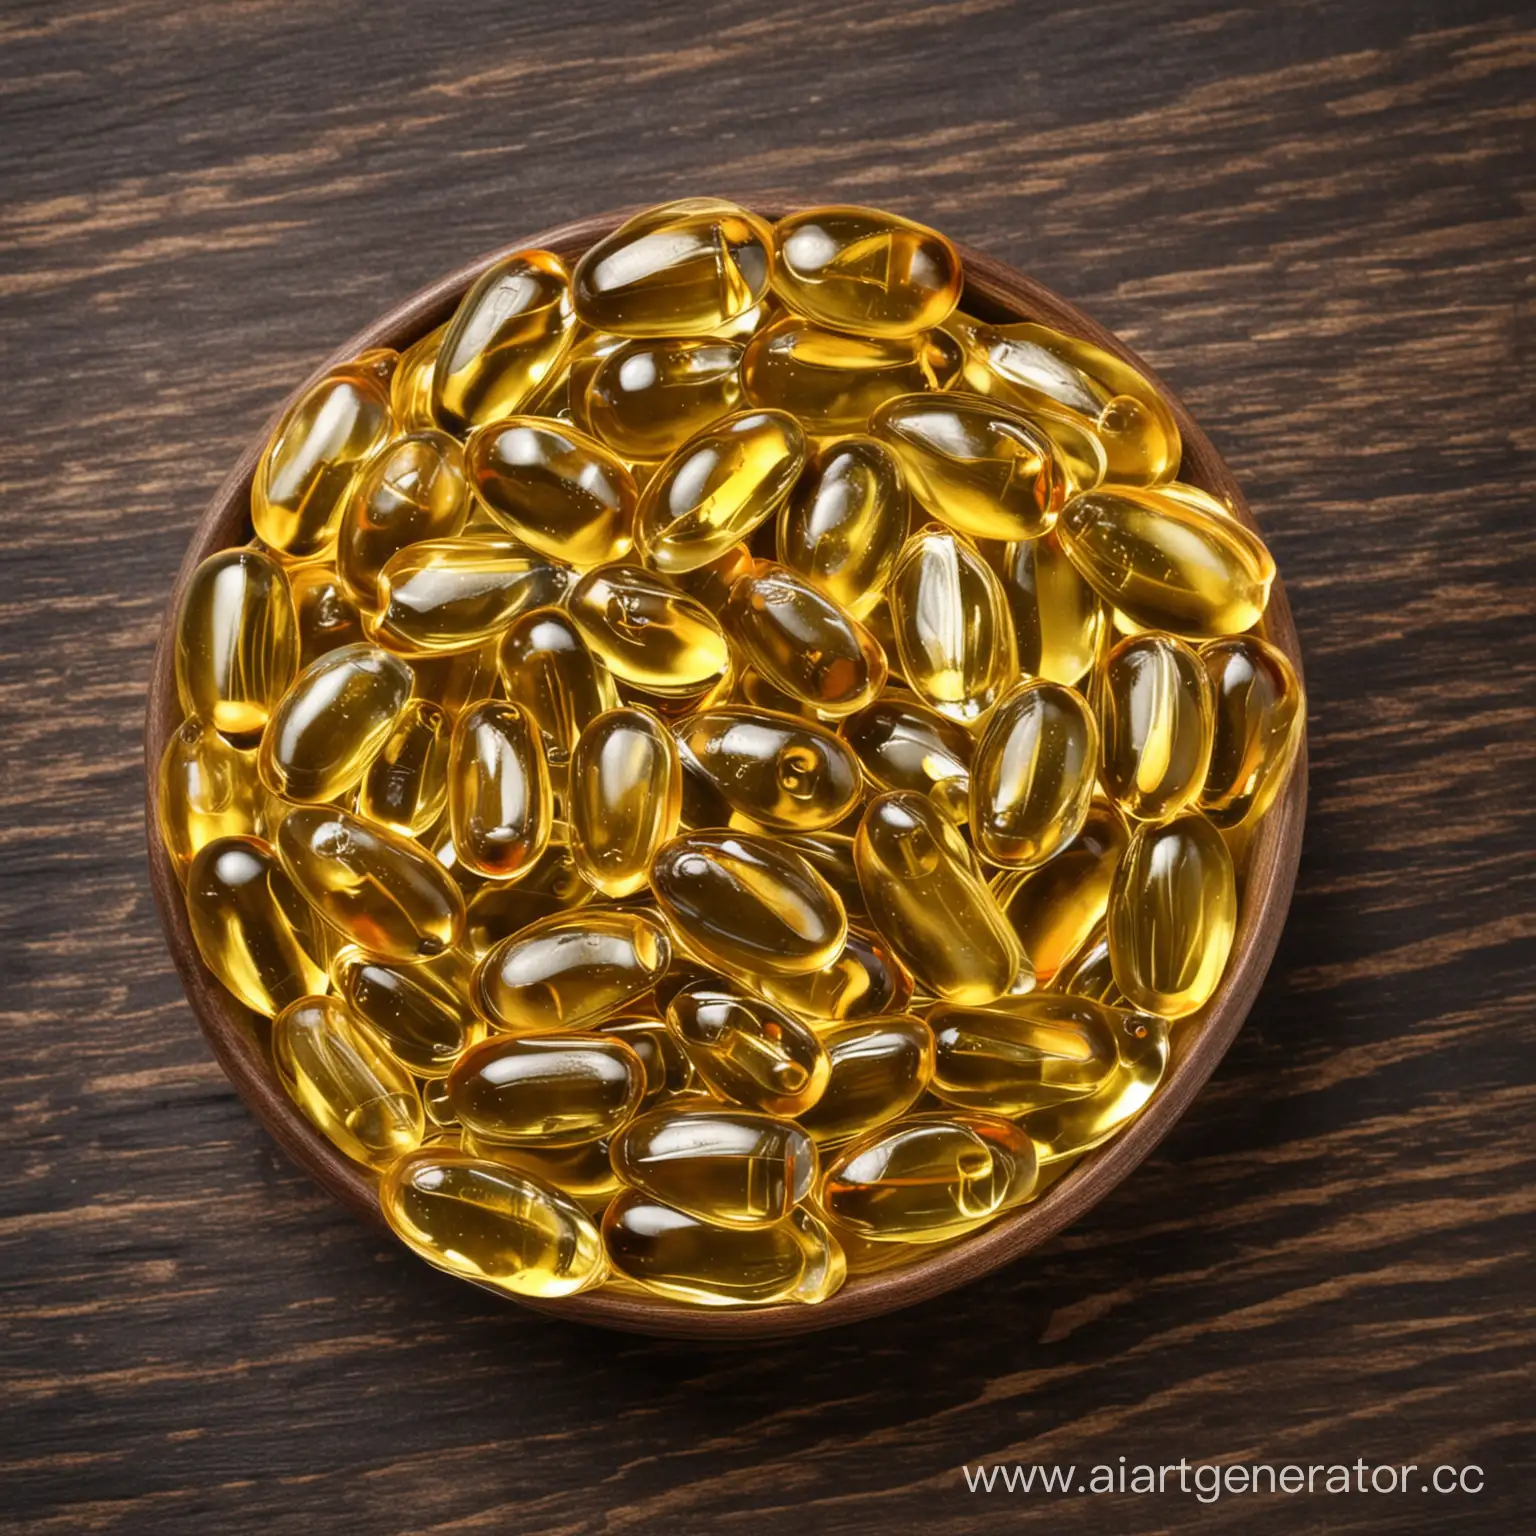 Vibrant-Fish-Oil-Supplement-Capsules-on-a-Reflective-Surface